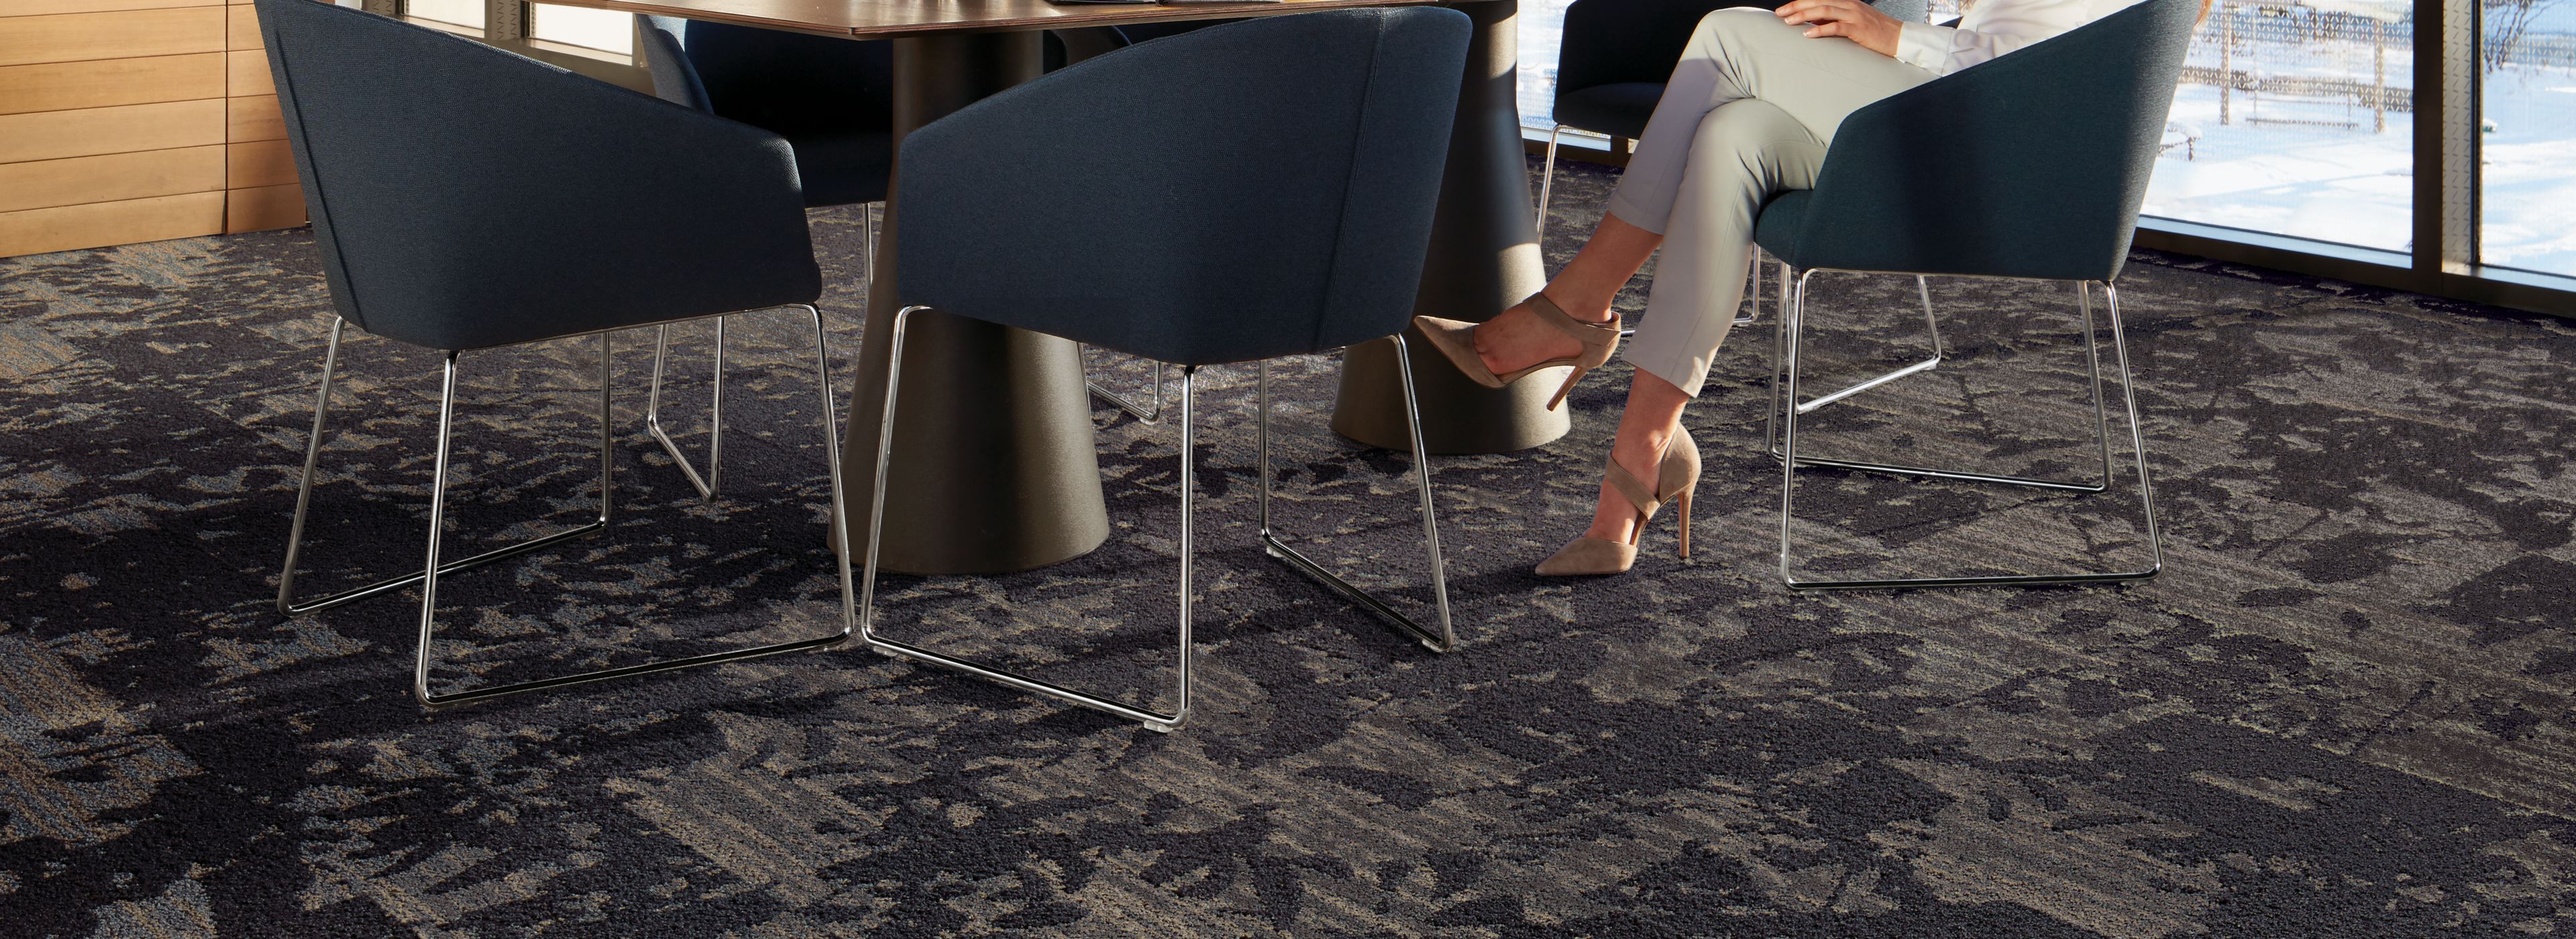 Interface Shading plank carpet tile in seating area with table and chairs image number 1